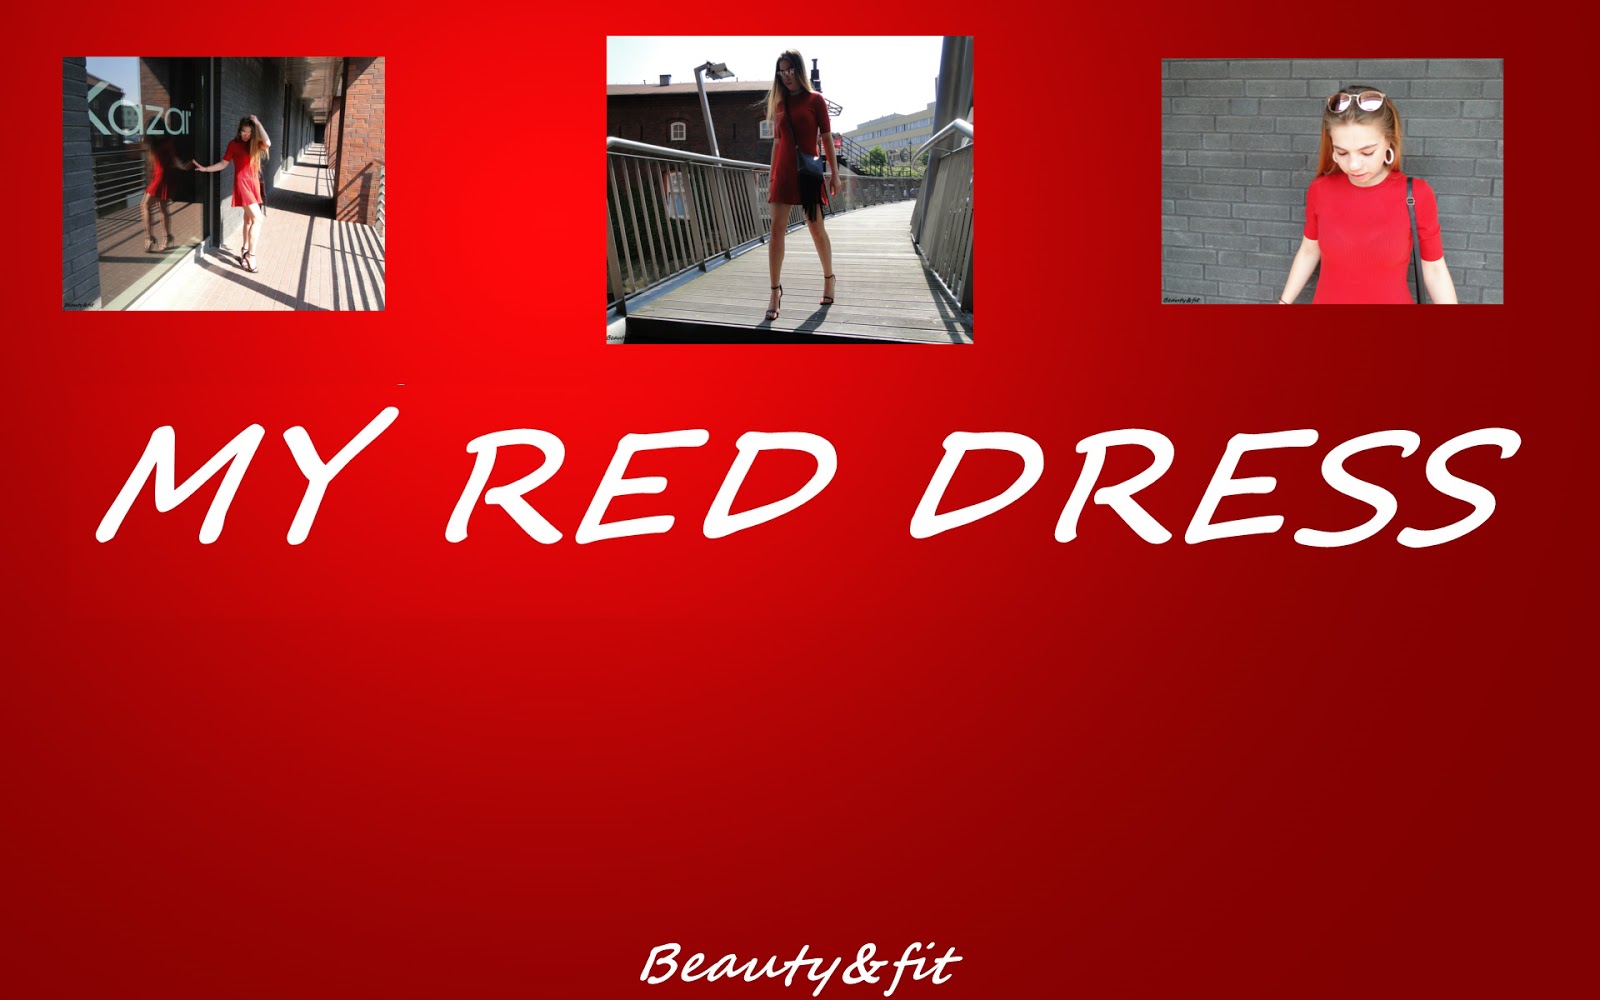 BEAUTY&FIT: MY RED DRESS! 